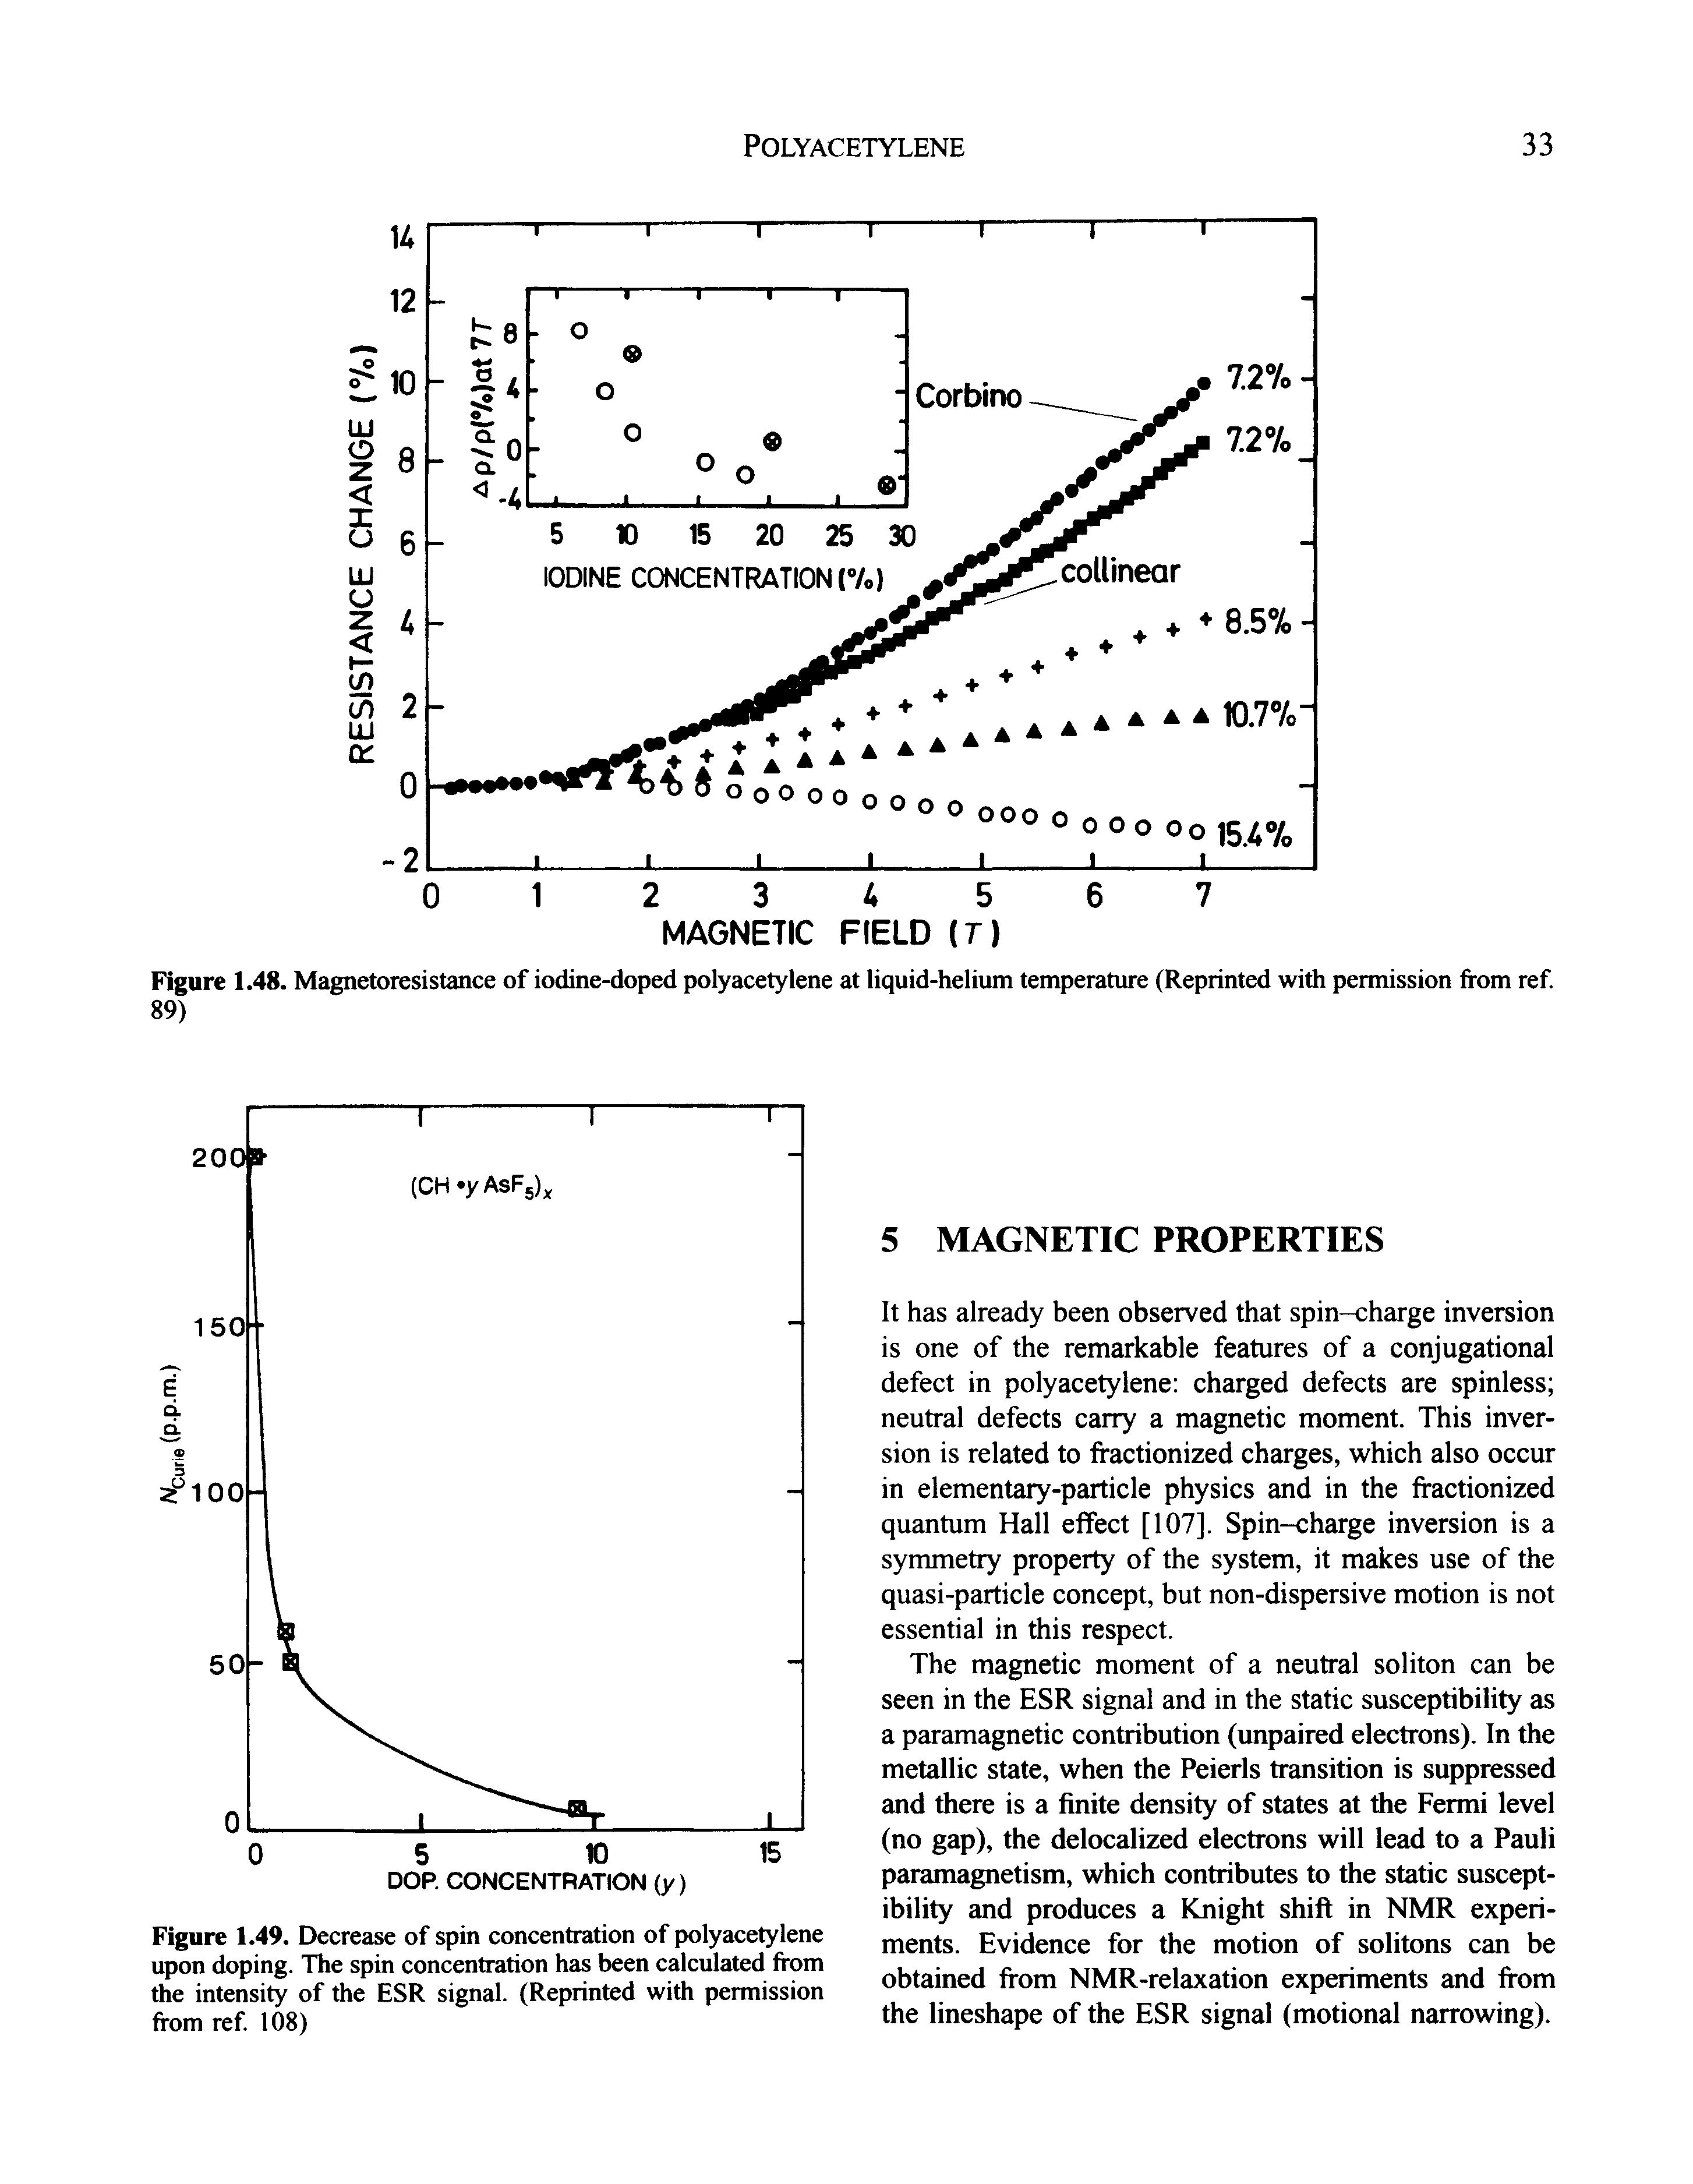 Figure 1.48. Magnetoresistance of iodine-doped polyacetylene at liquid-helium temperature (Reprinted with permission from ref 89)...